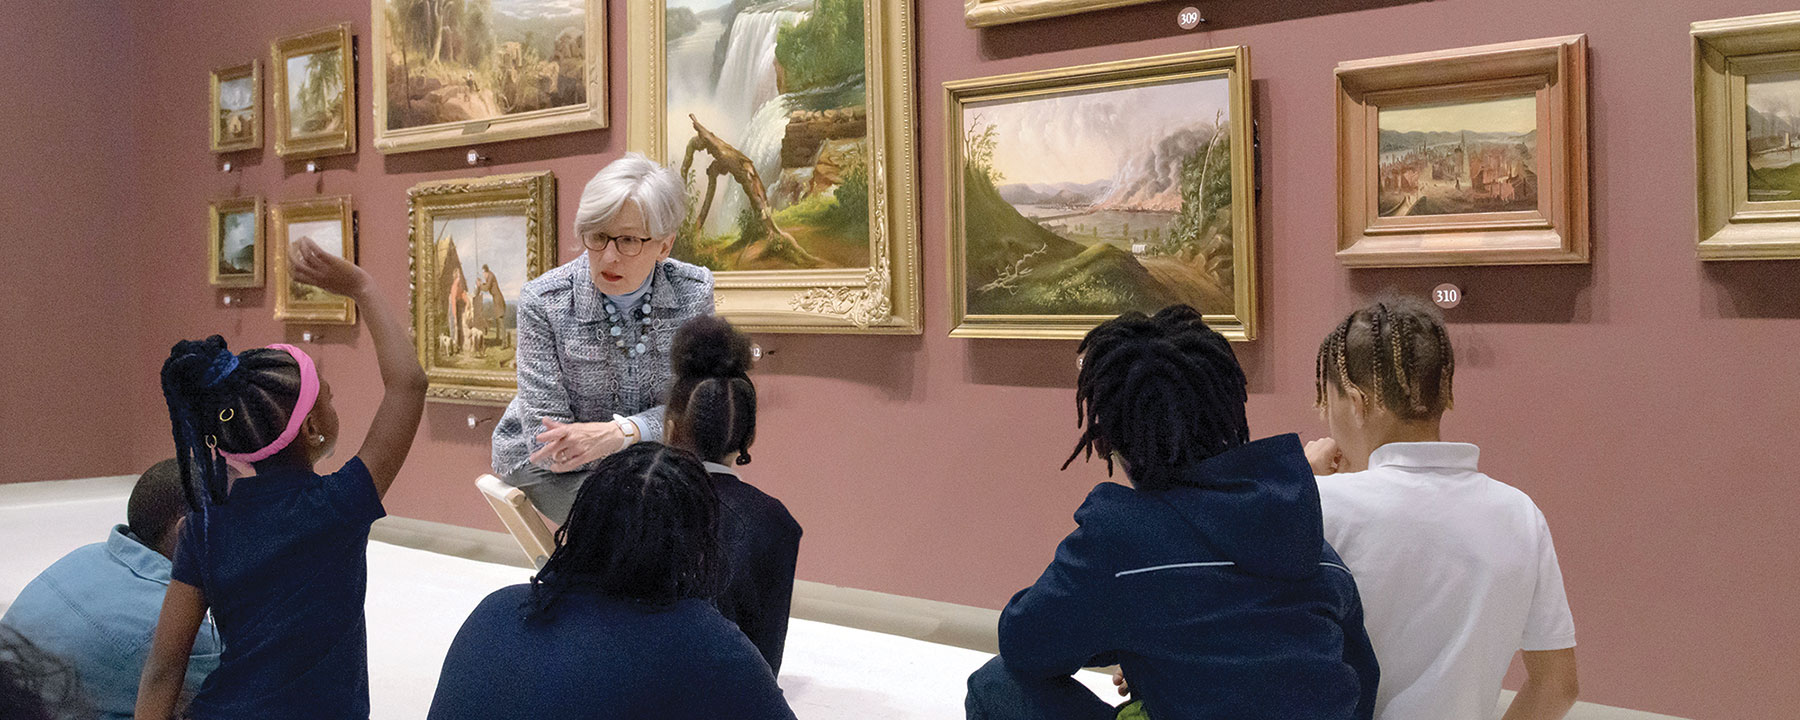 An art docent talking to a group of young students in an art gallery.